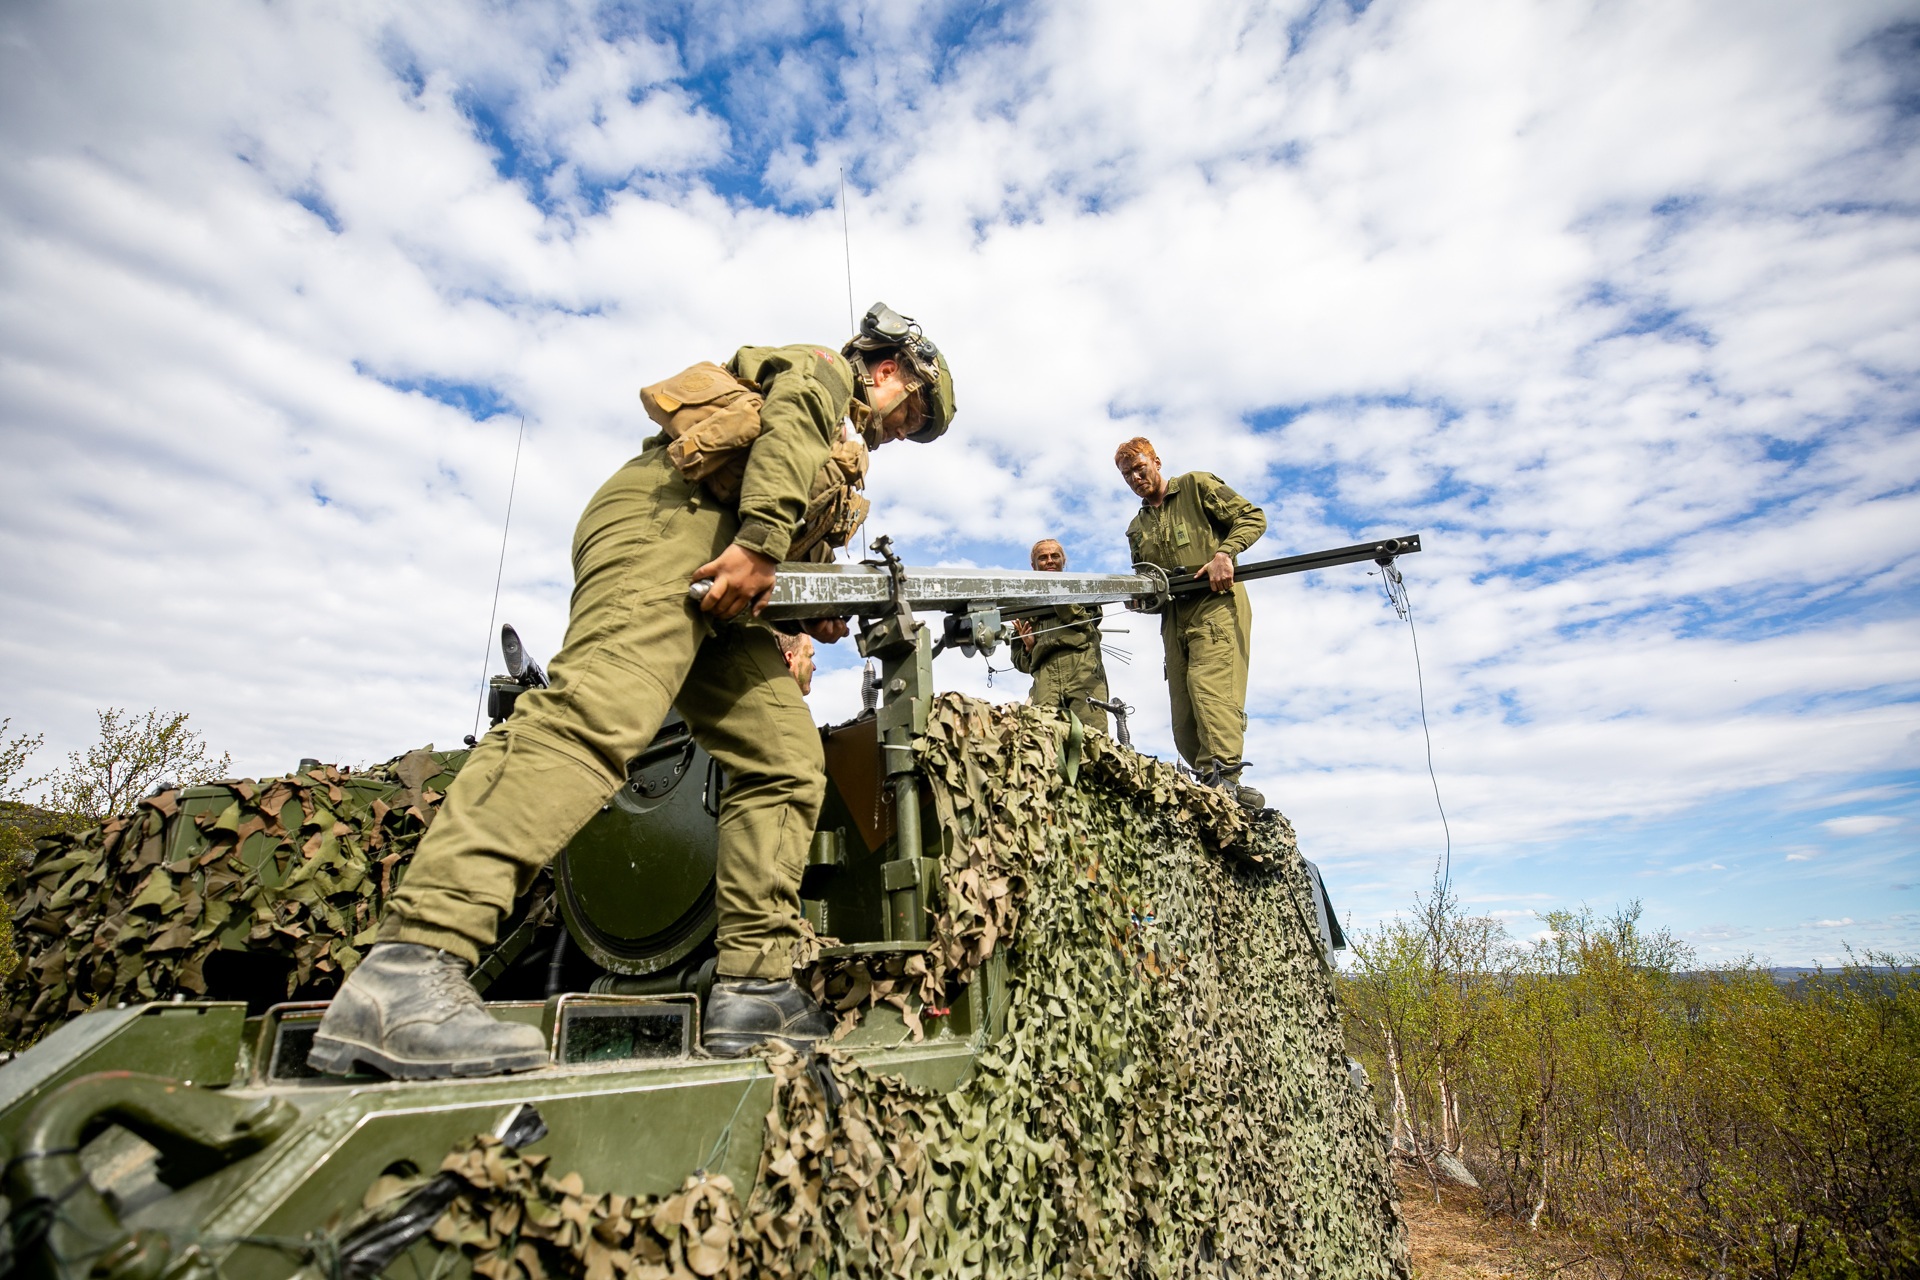 Soldiers from Artillerybatalion seting up signal during exersice Thunderbolt.